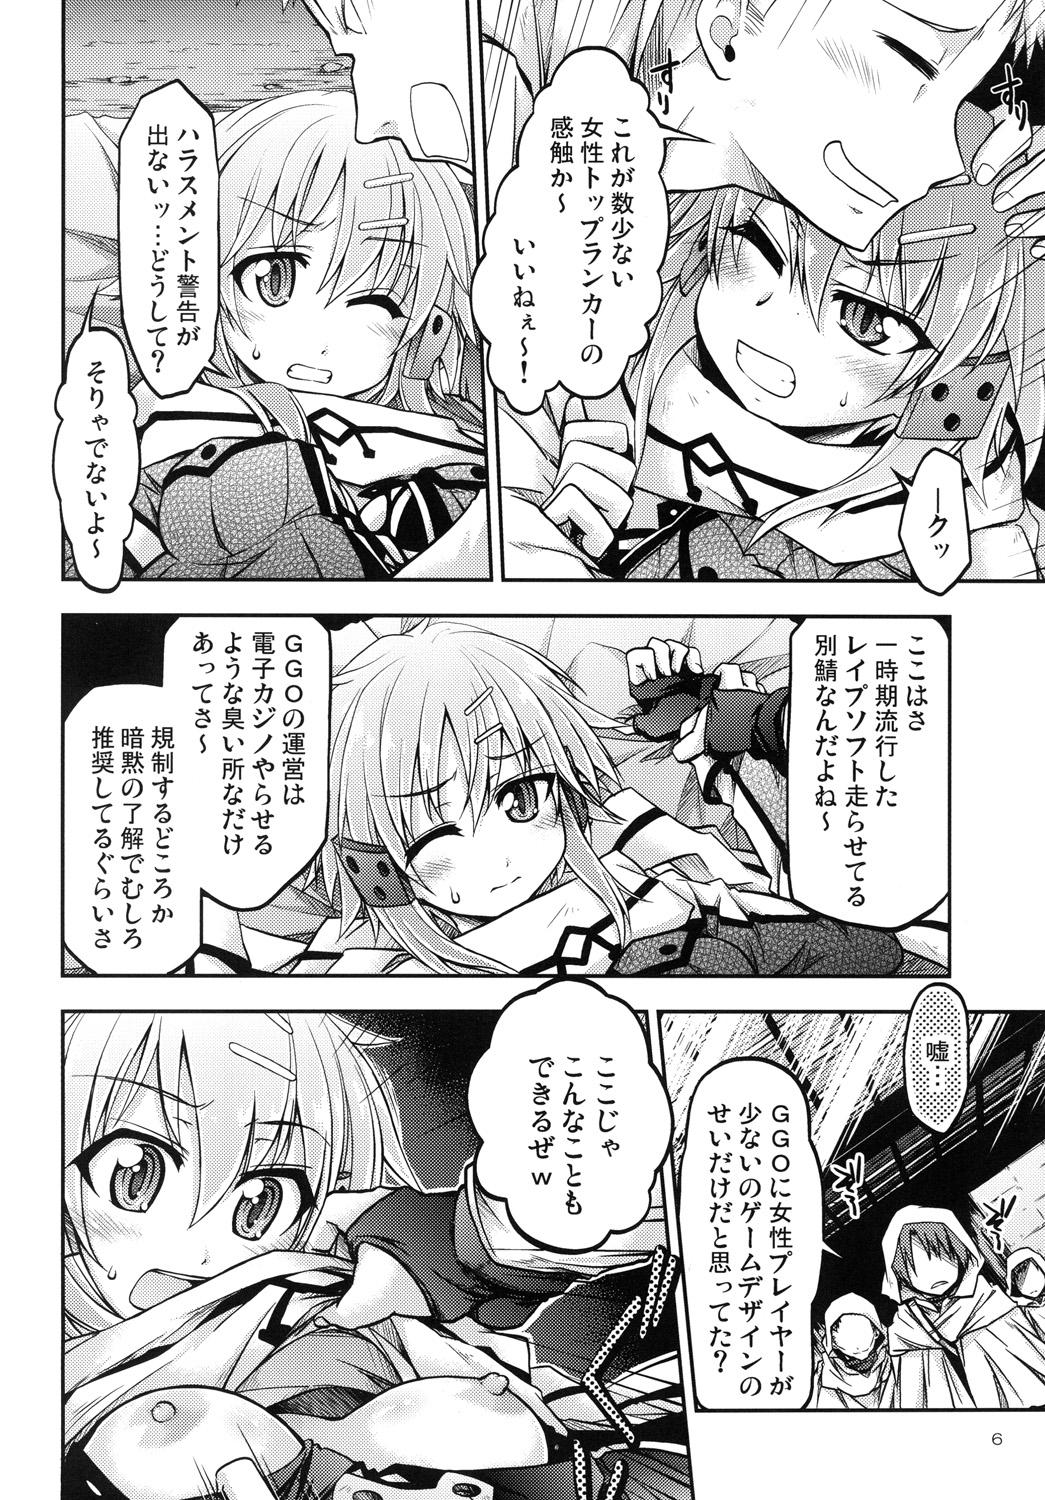 Rimming Gspot - Sword art online Leche - Page 5